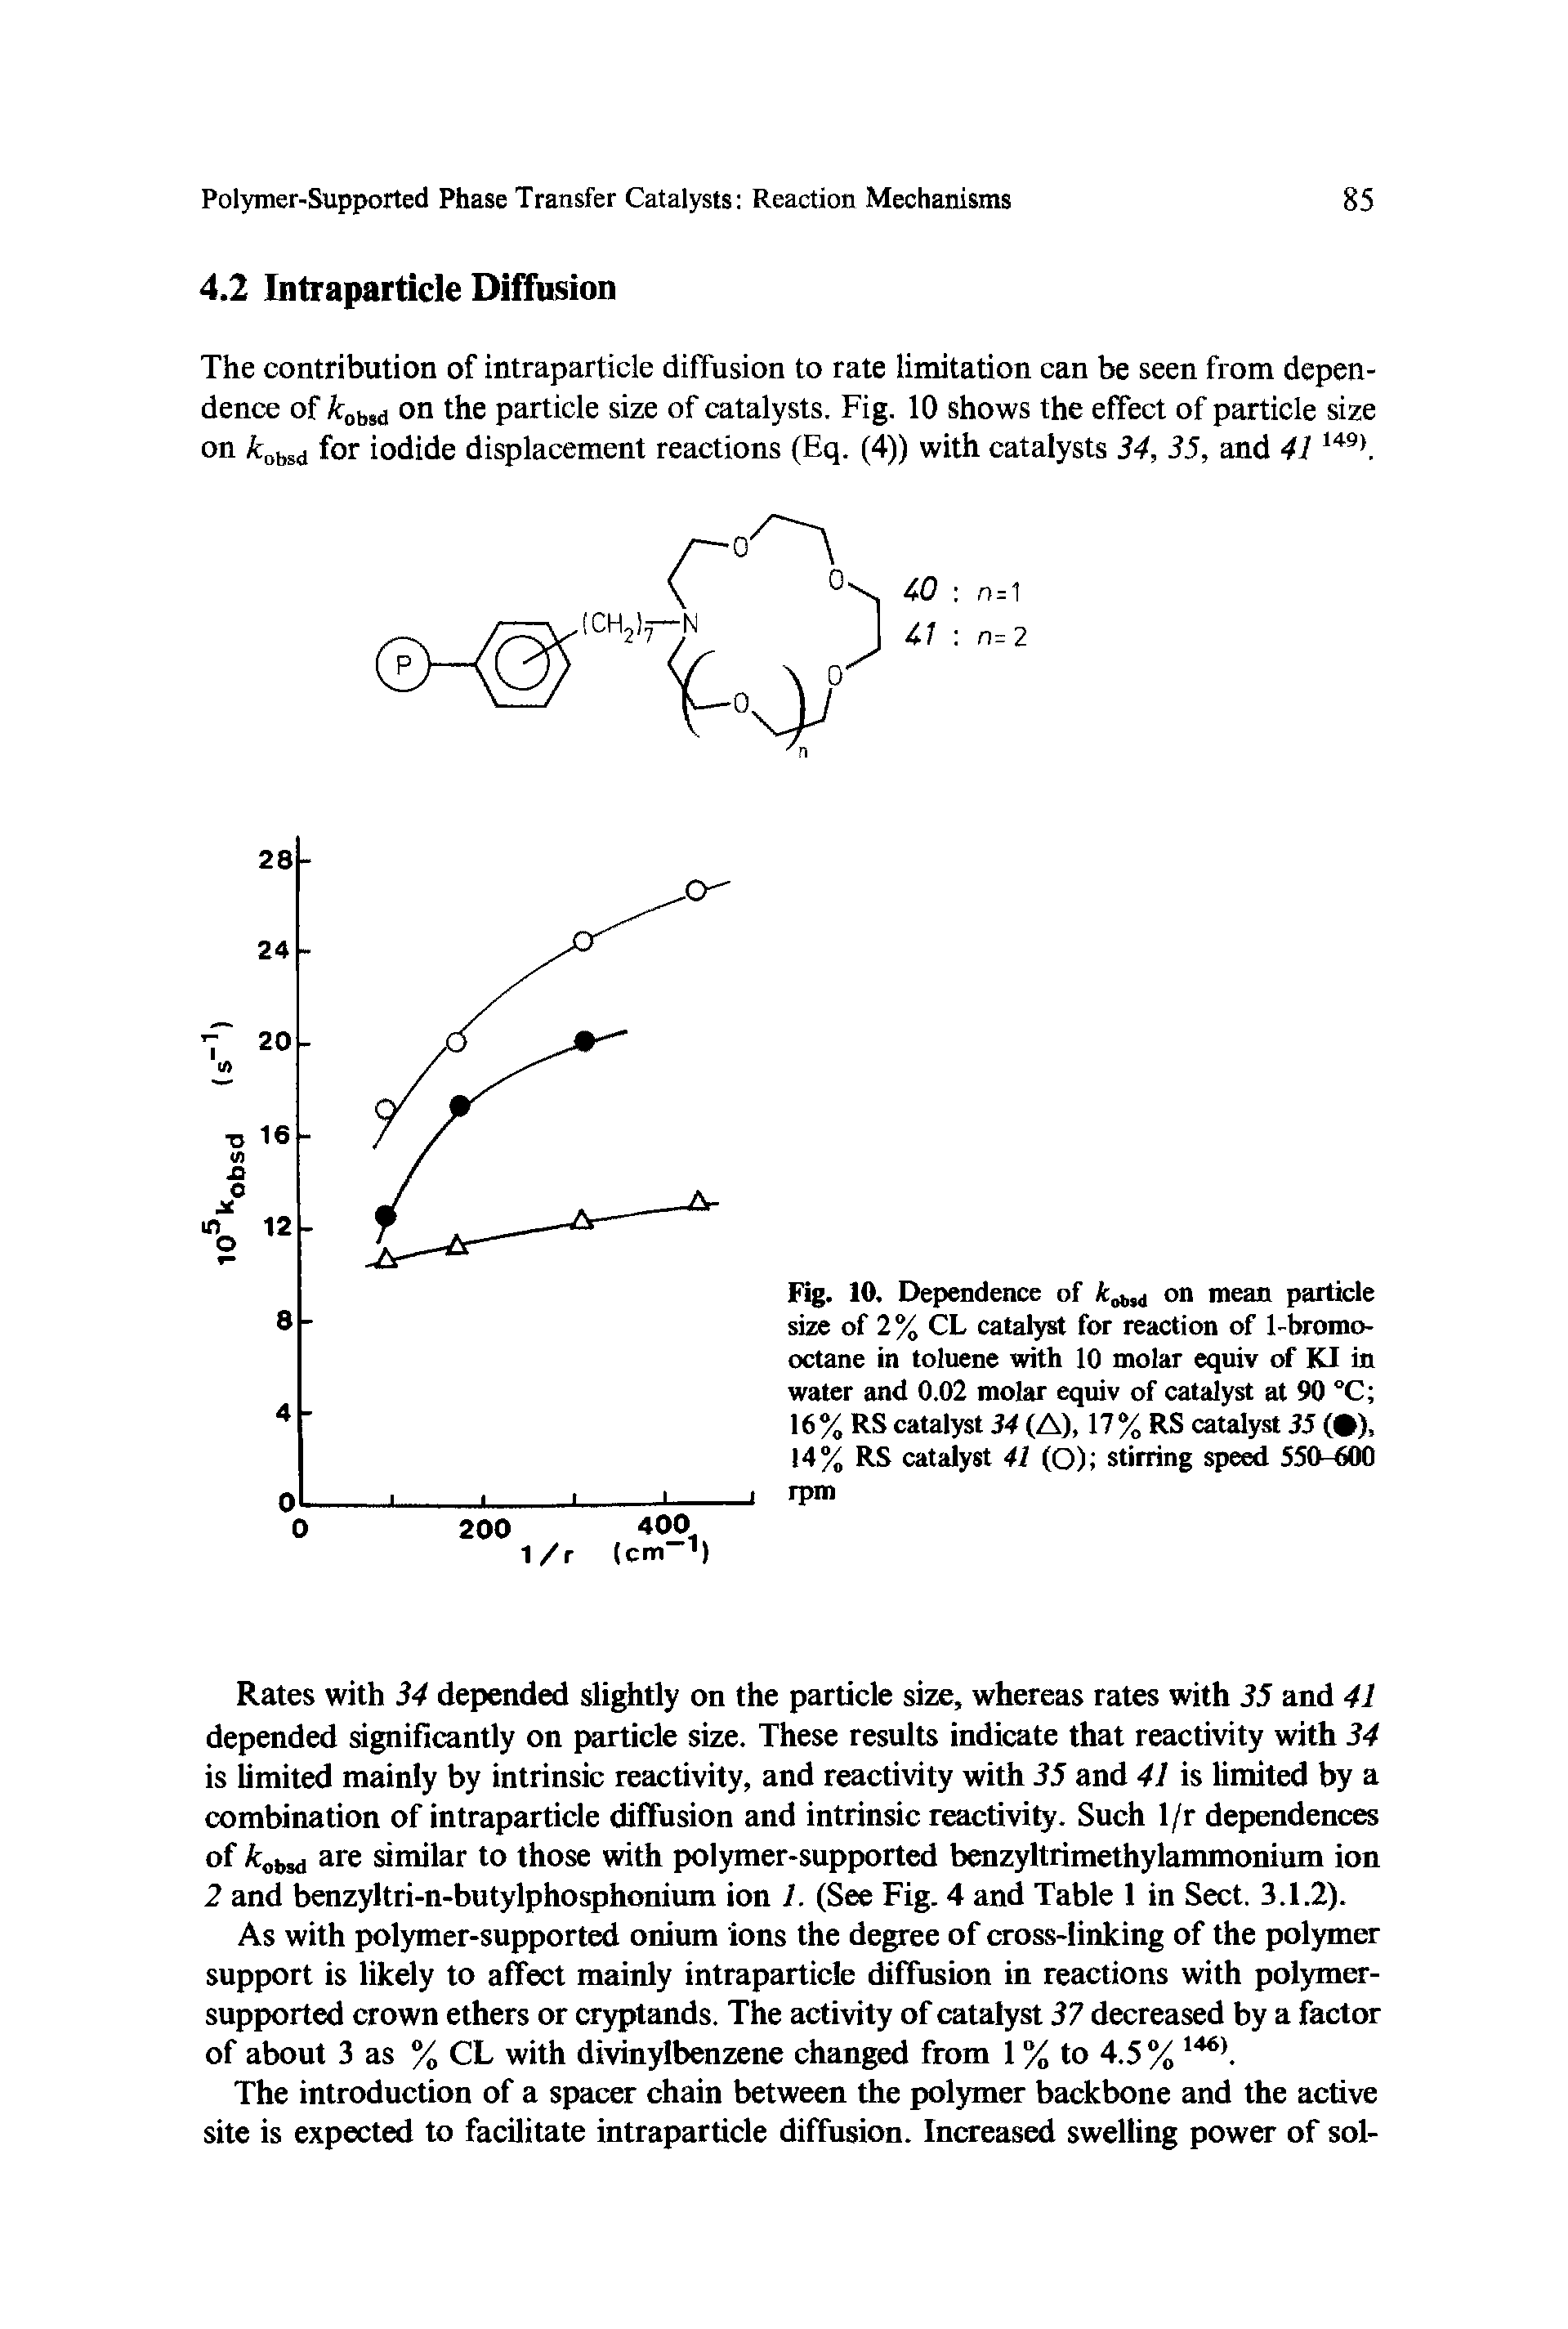 Fig. 10. Dependence of on mean particle size of 2% CL catalyst for reaction of 1-bromo-octane in toluene with 10 molar equiv of KI in water and 0.02 molar equiv of catalyst at 90 °C 16% RS catalyst 34 (A), 17% RS catalyst 35 ( ), 14% RS catalyst 41 (O) stirring speed 550-600 rpm...